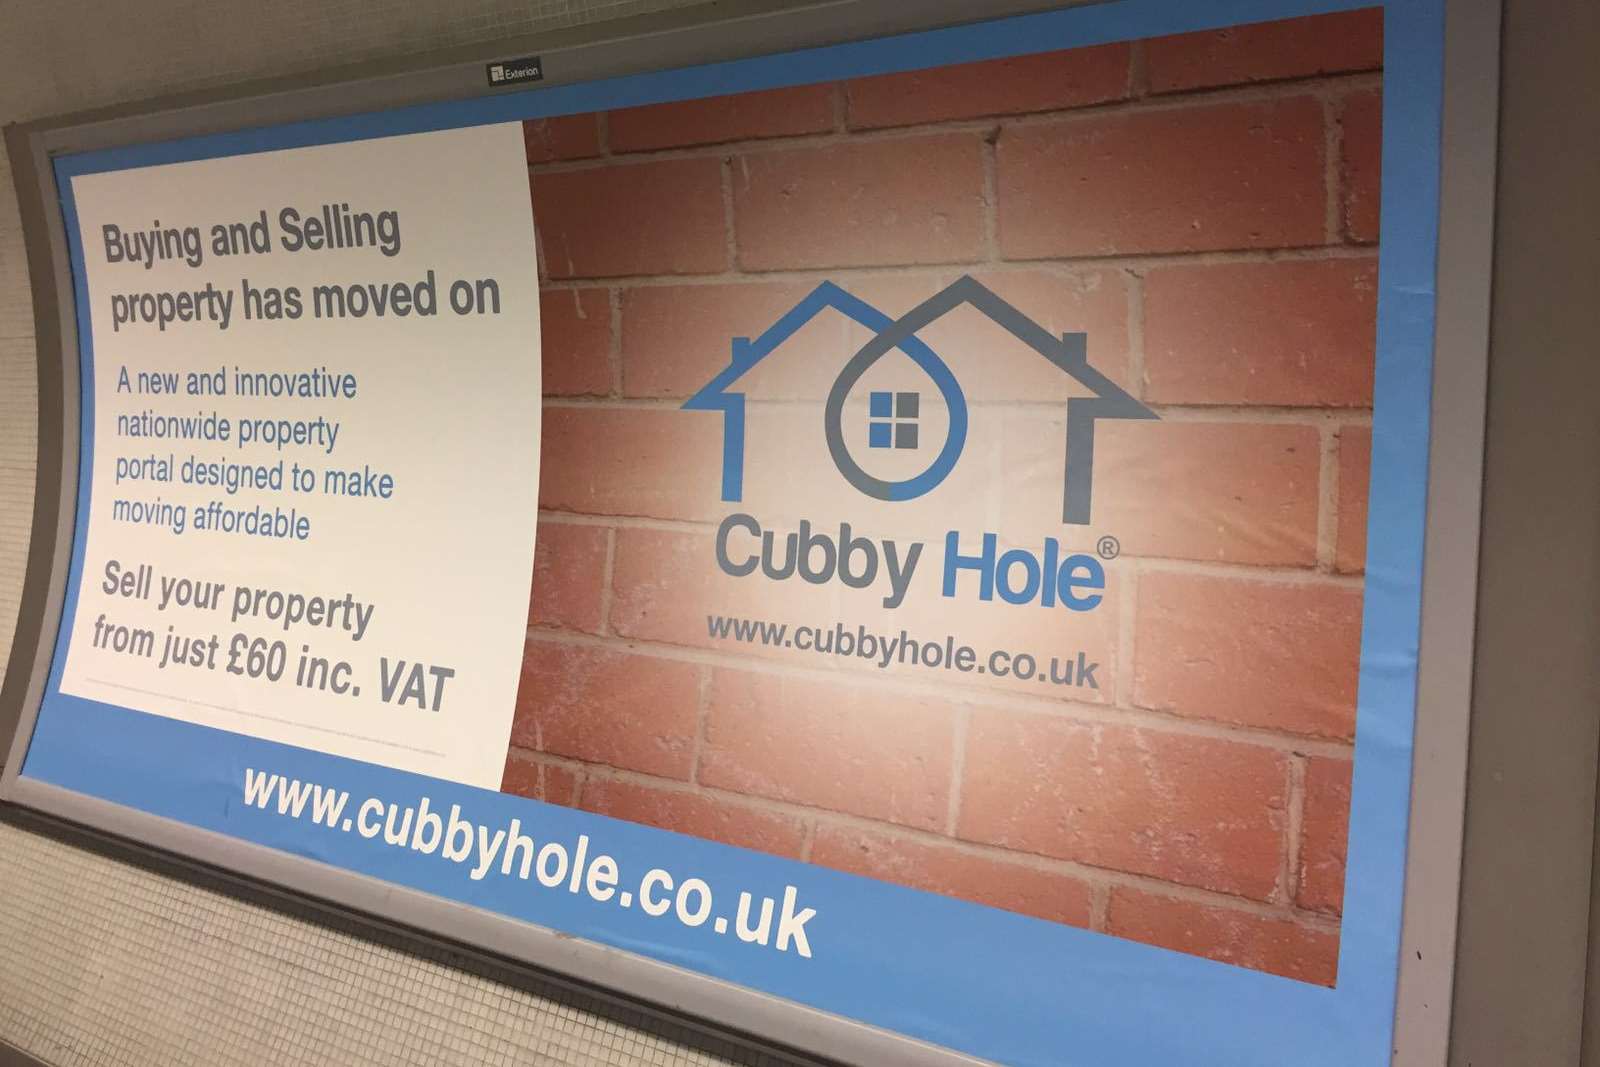 CubbyHole has launched a £2 million marketing campaign